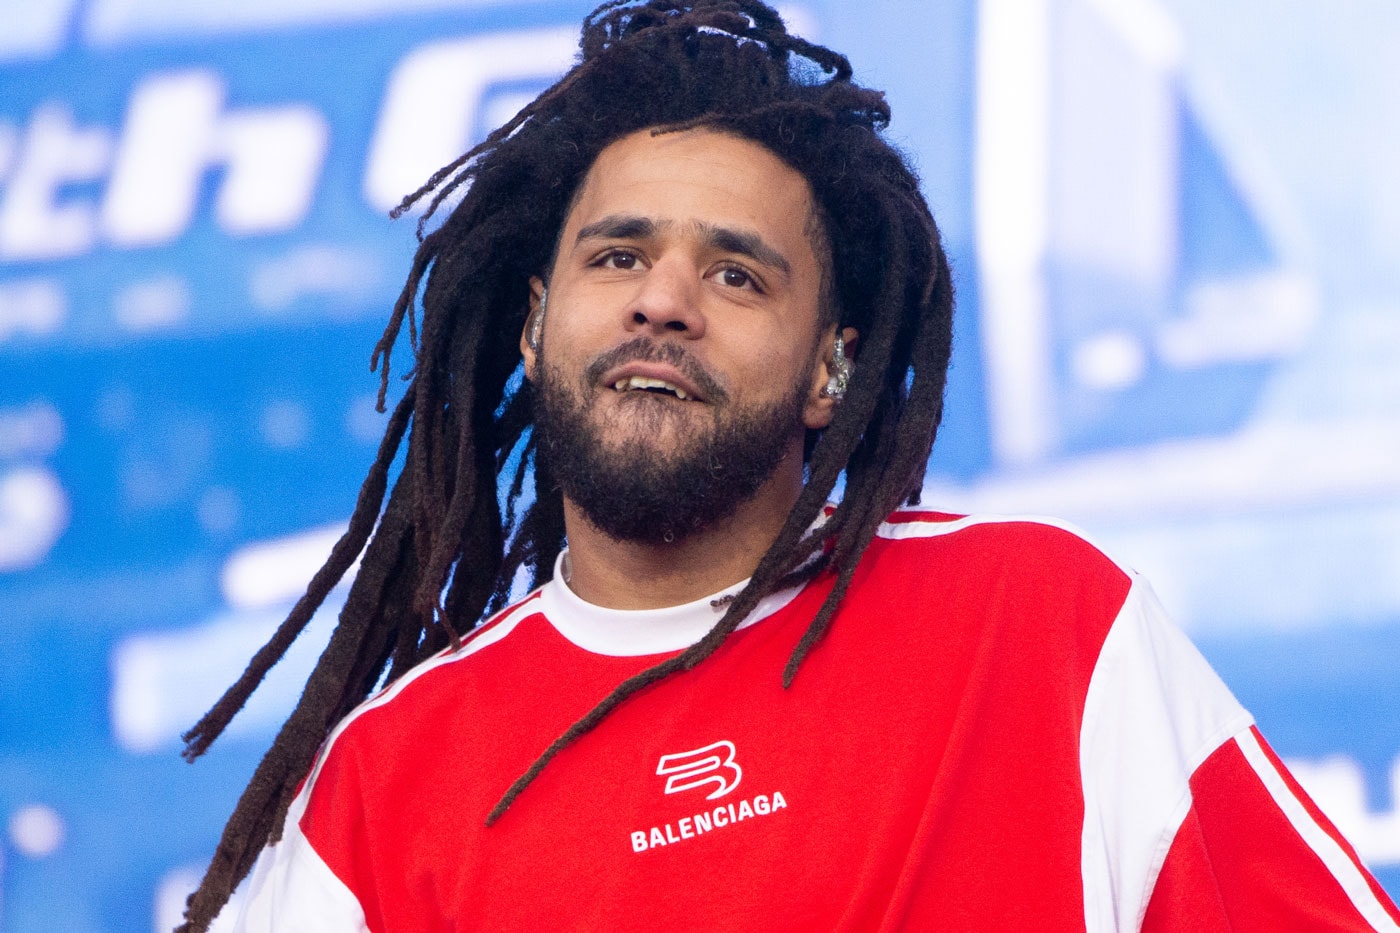 J. Cole & Dreamville Plan to Release a New Album This Week